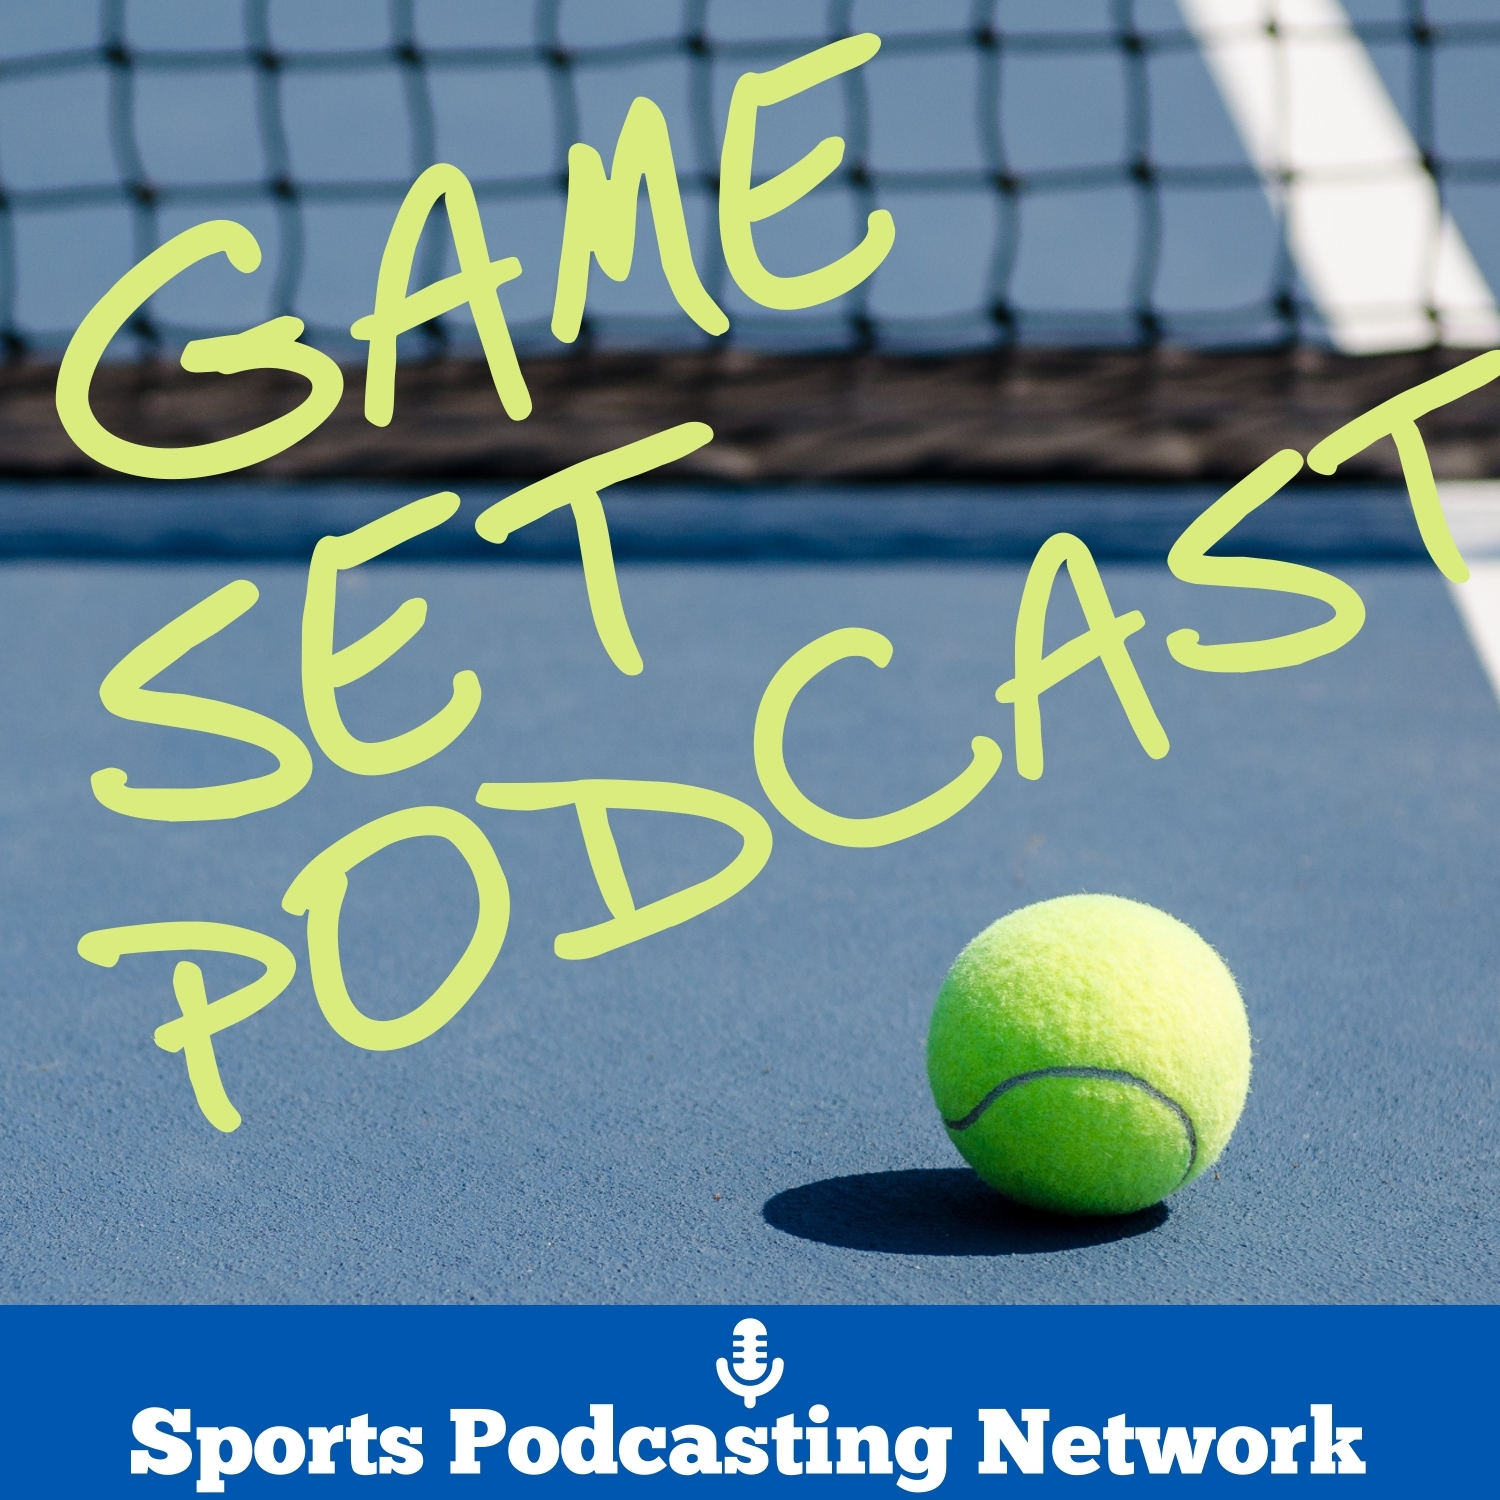 Game Set Podcast – Sports Podcasting Network